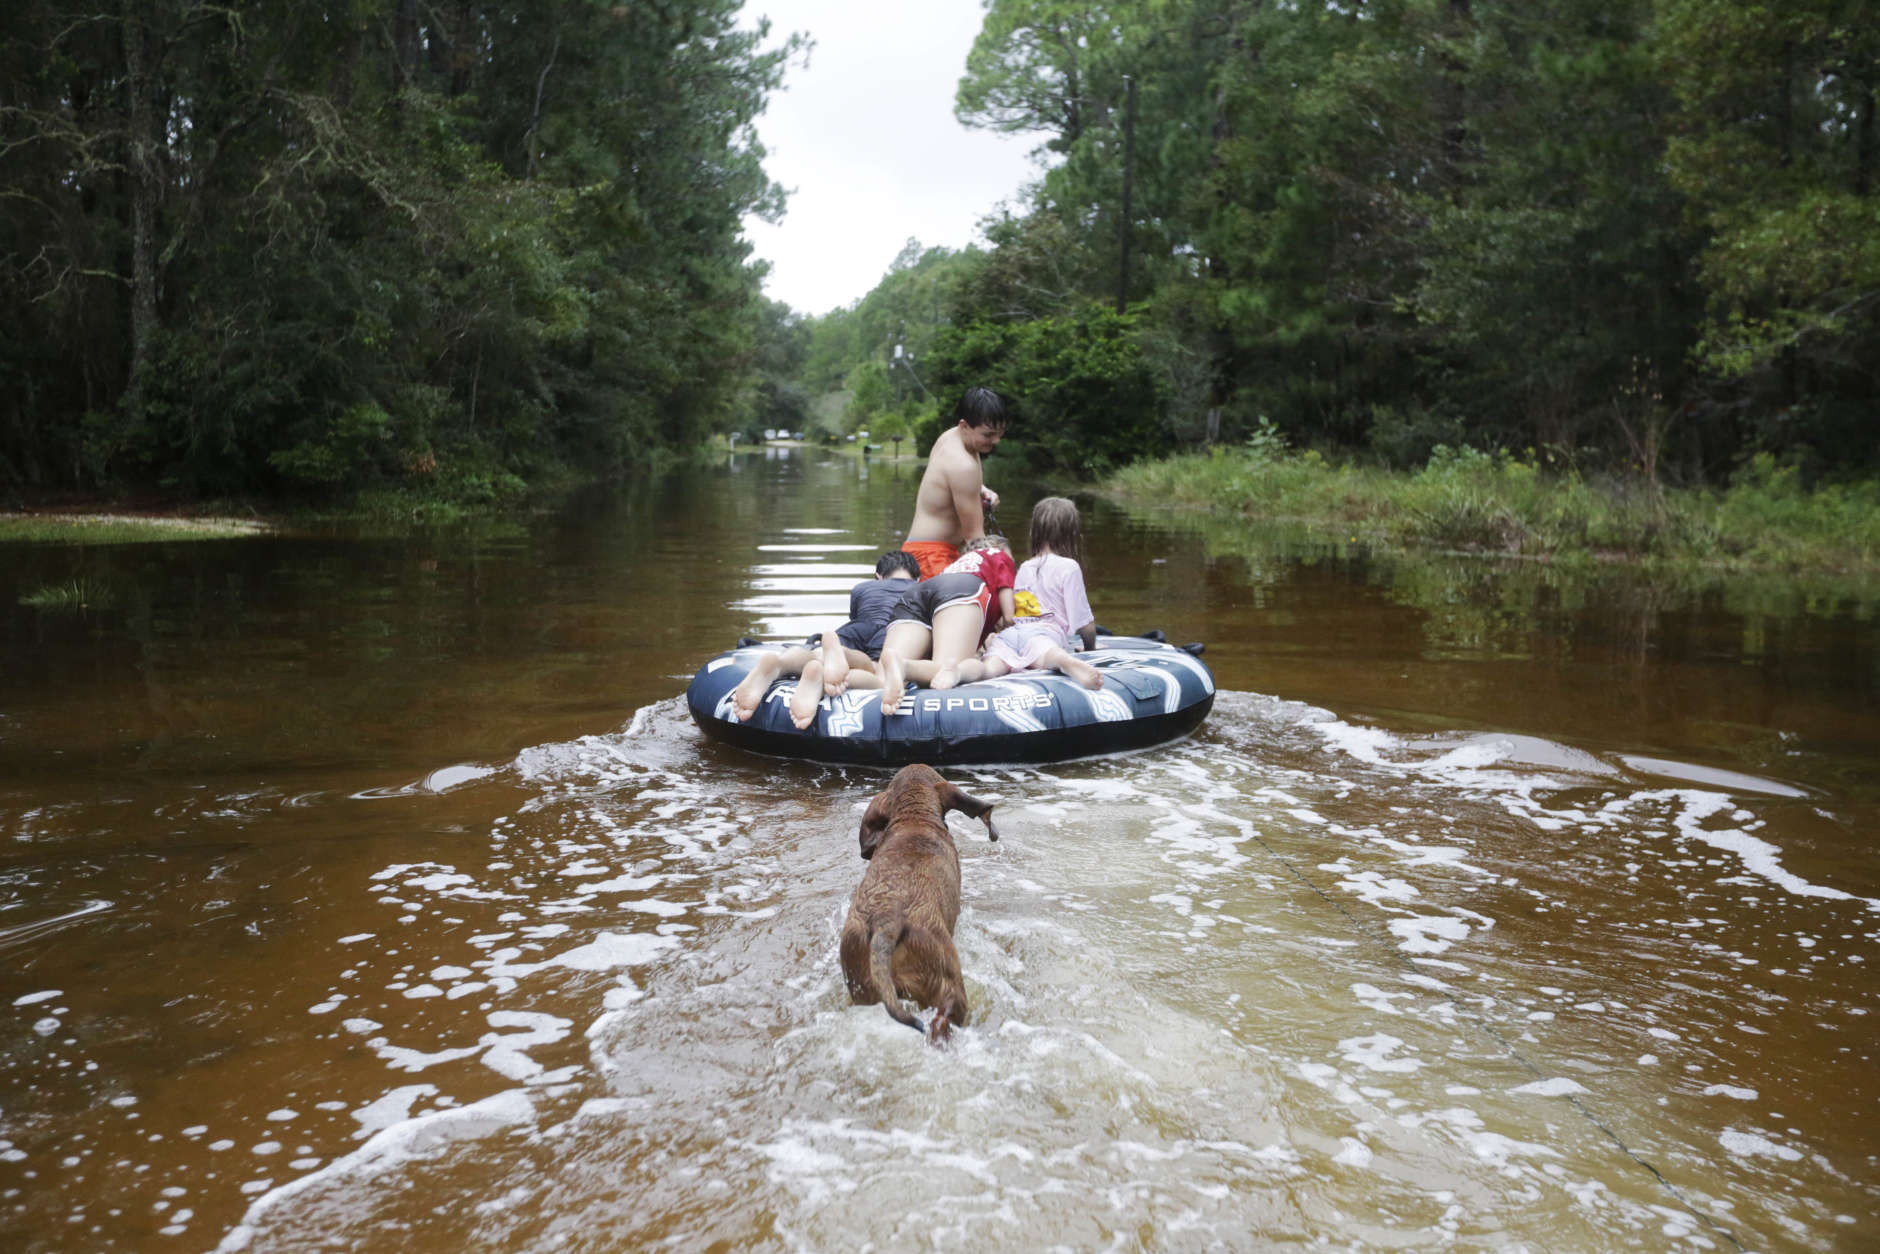 Crimson Peters, 7, right, Tracy Neilsen, 13, center top, Macee Neilsen, 15, center, and Tim Neilsen III, 16 ride an inter tube as their dog "Chevy" trials behind them down a flooded street after Hurricane Nate, Sunday, Oct. 8, 2017, in Coden, Ala. (AP Photo/Brynn Anderson)